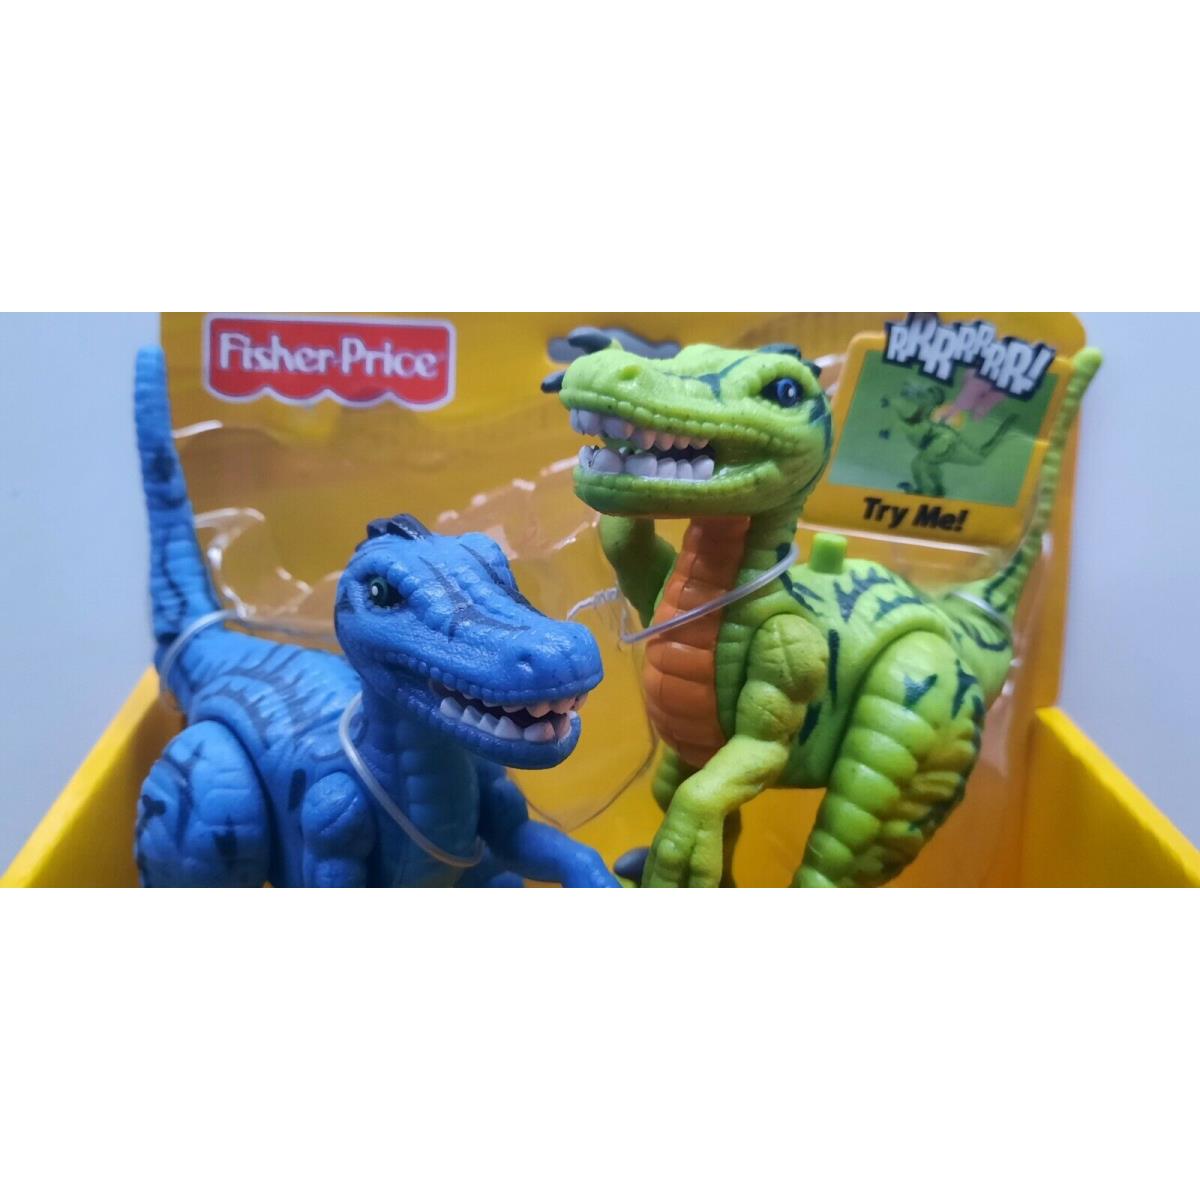 Imaginext Raptors By Fisher Price From 2008 - Vintage